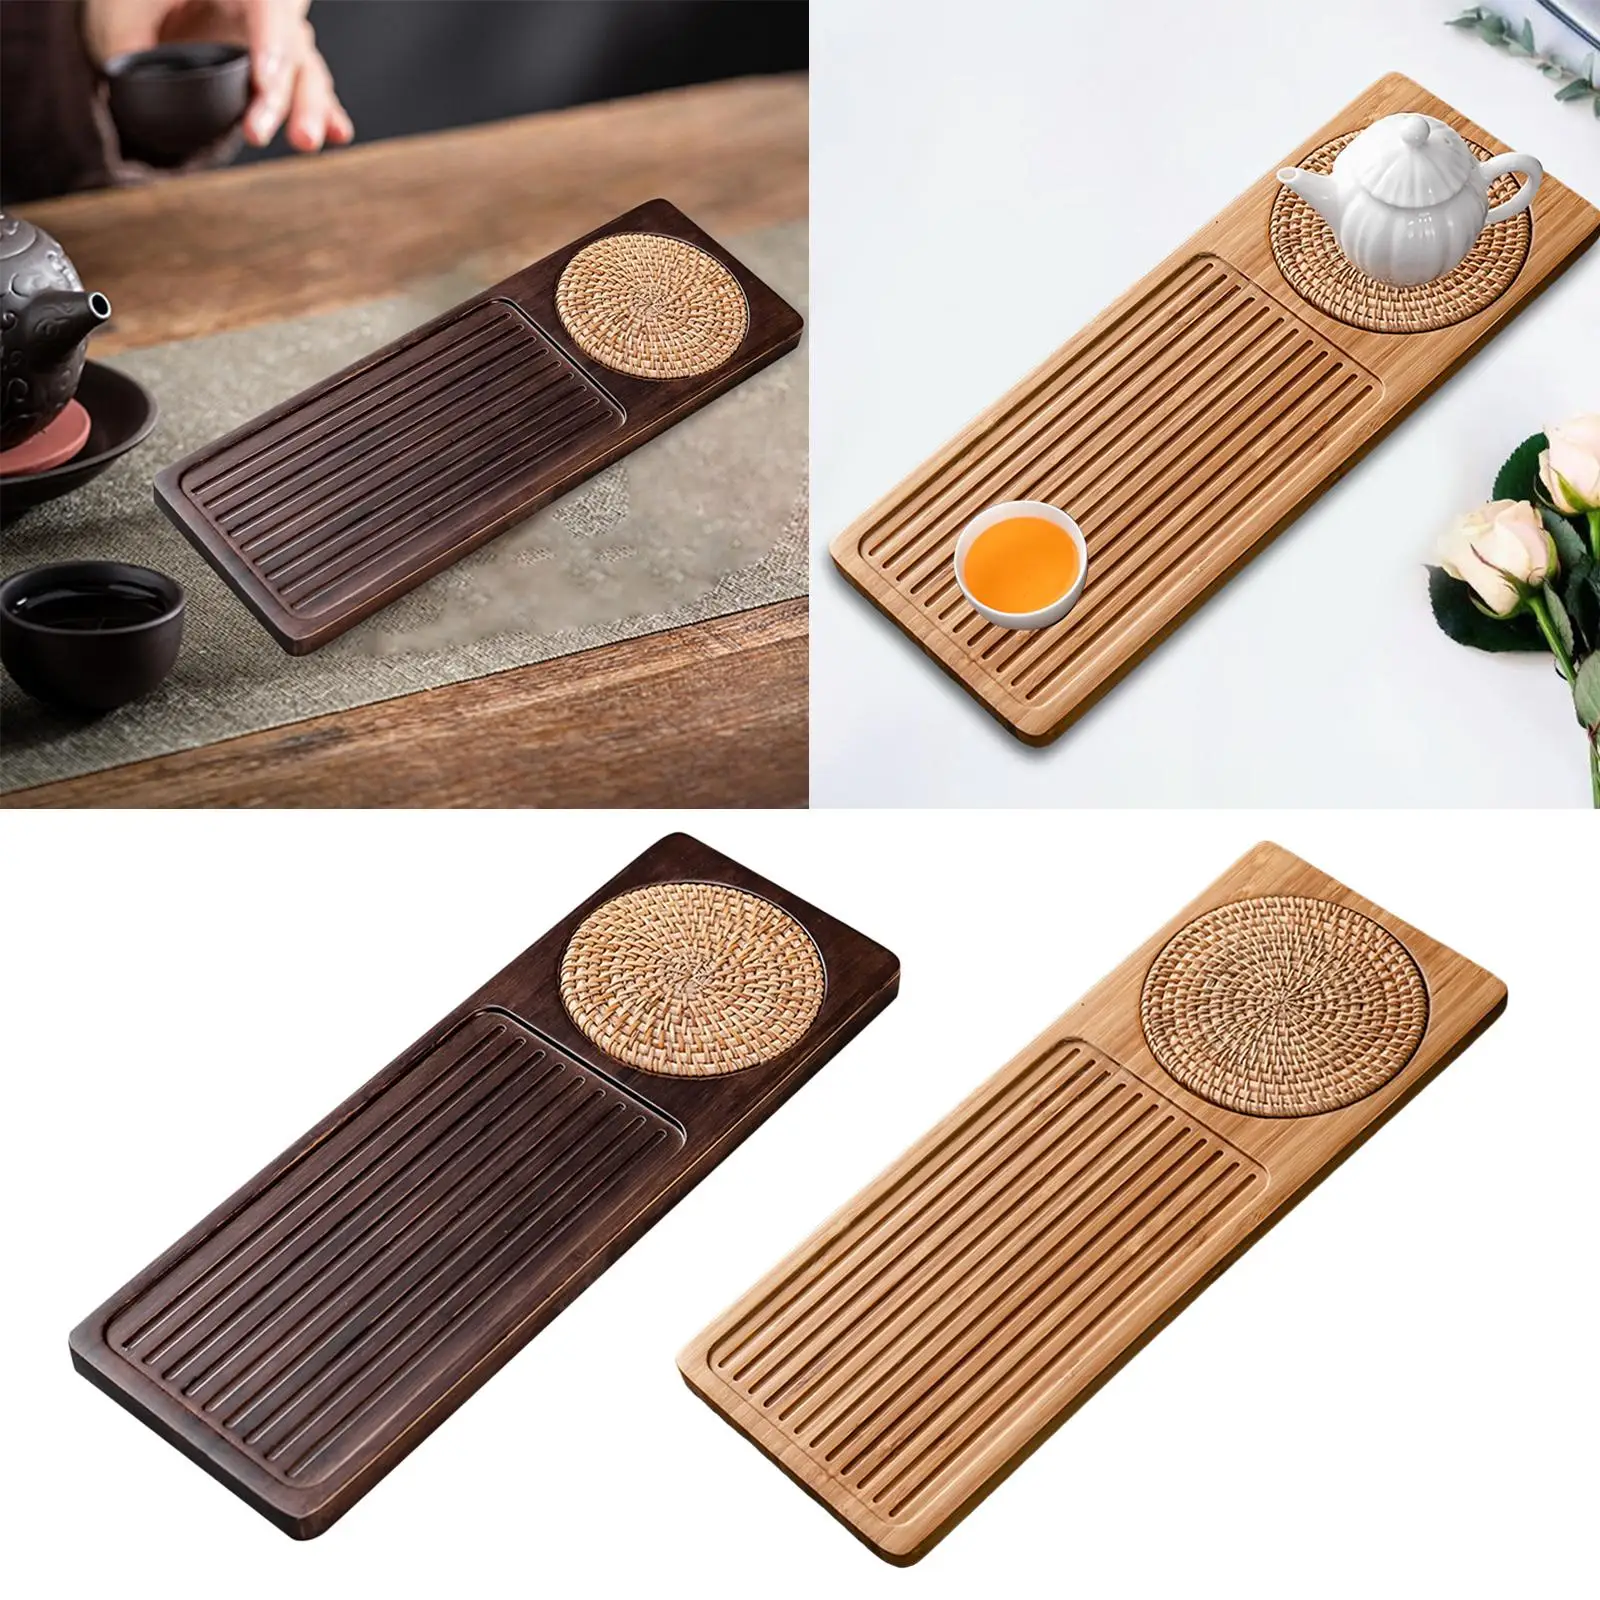 Rectangular Bamboo Chinese Tea Serving Tray Japanese Tea Serving Tray Household Tea Board for Travel Home Decoration Accessories